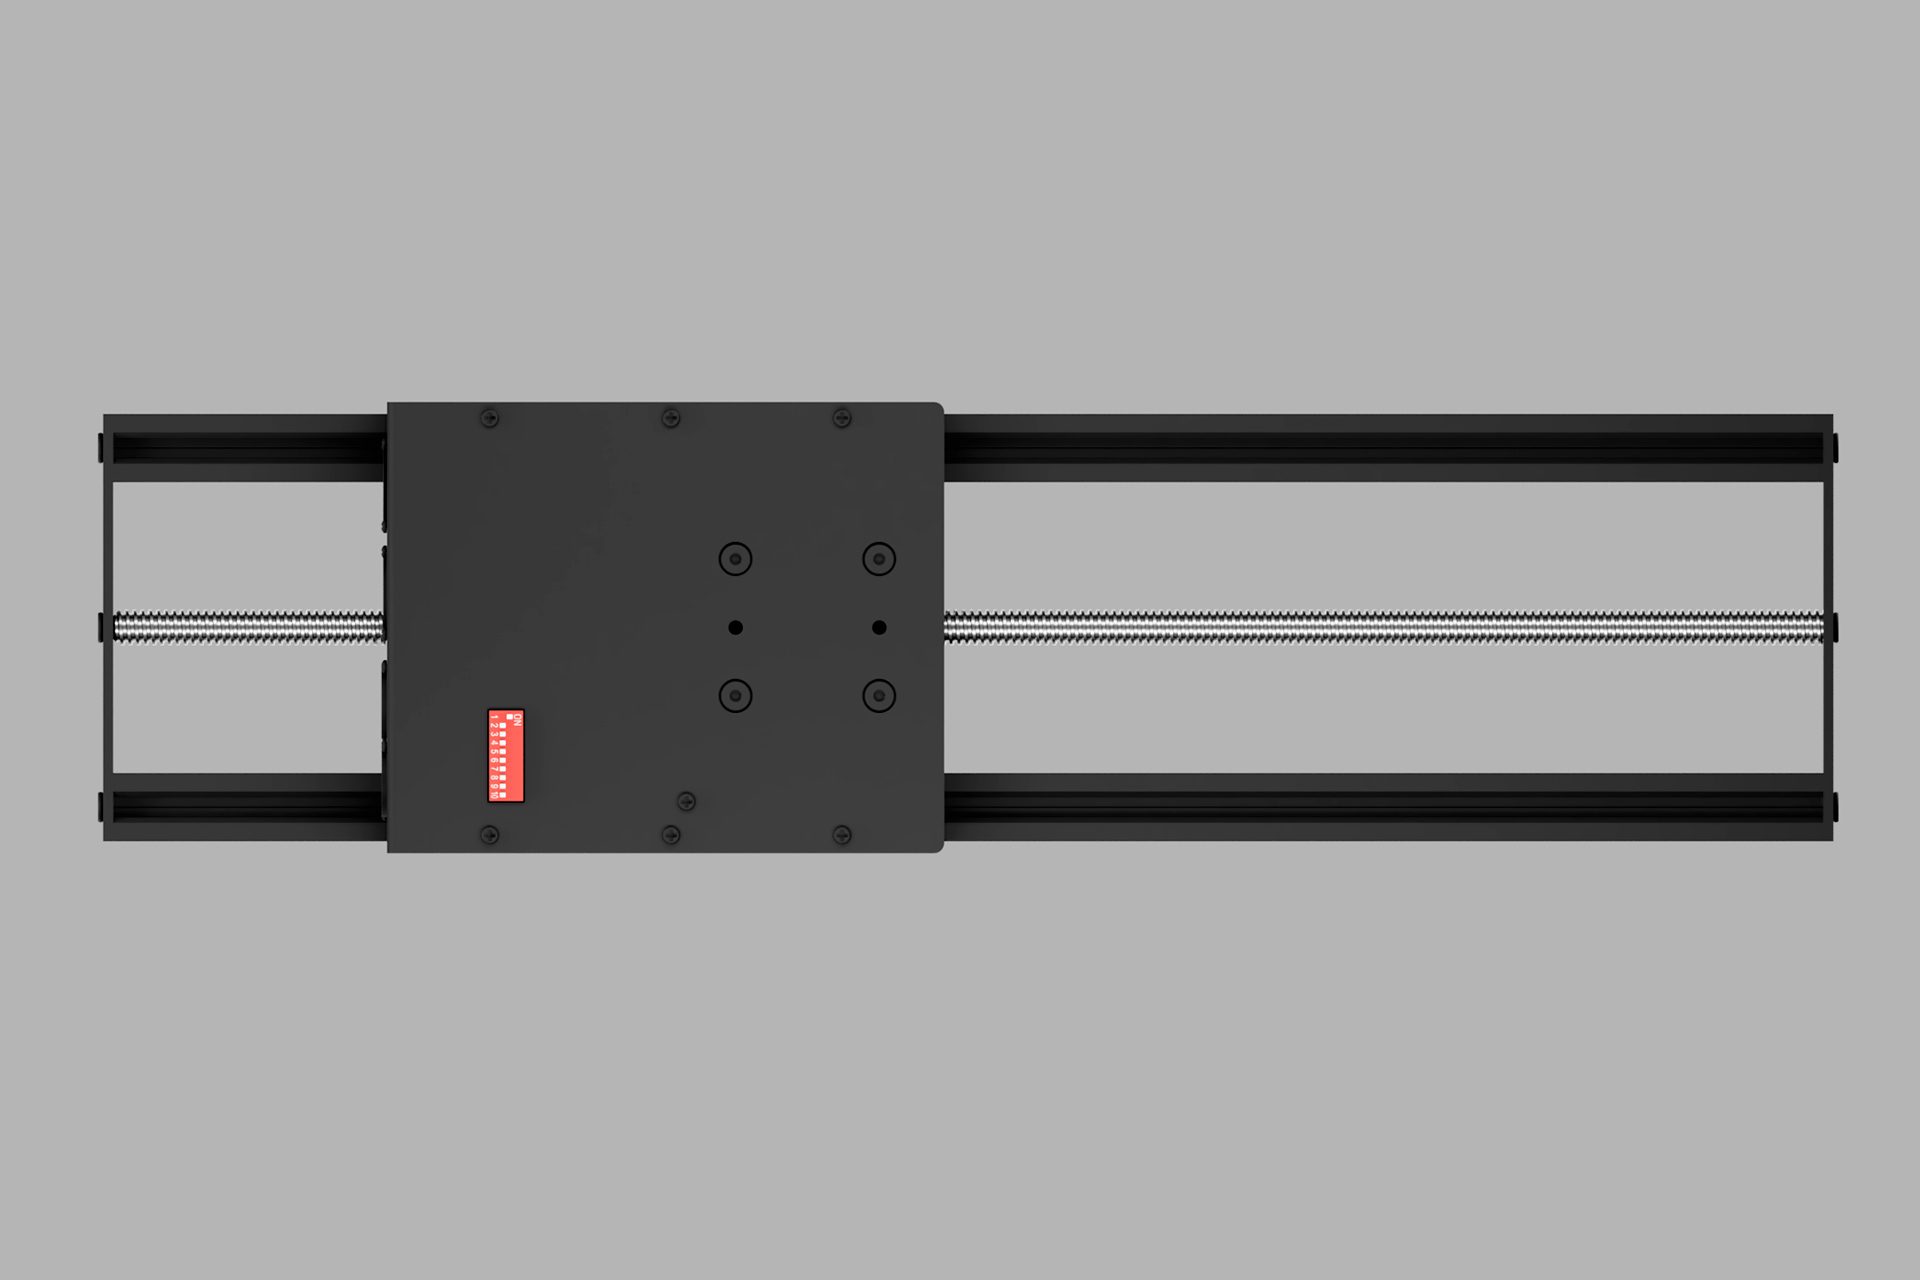 Bottom view of the DMX Linear Actuator Heavy with the dip switch and two M5 fixing possibilities